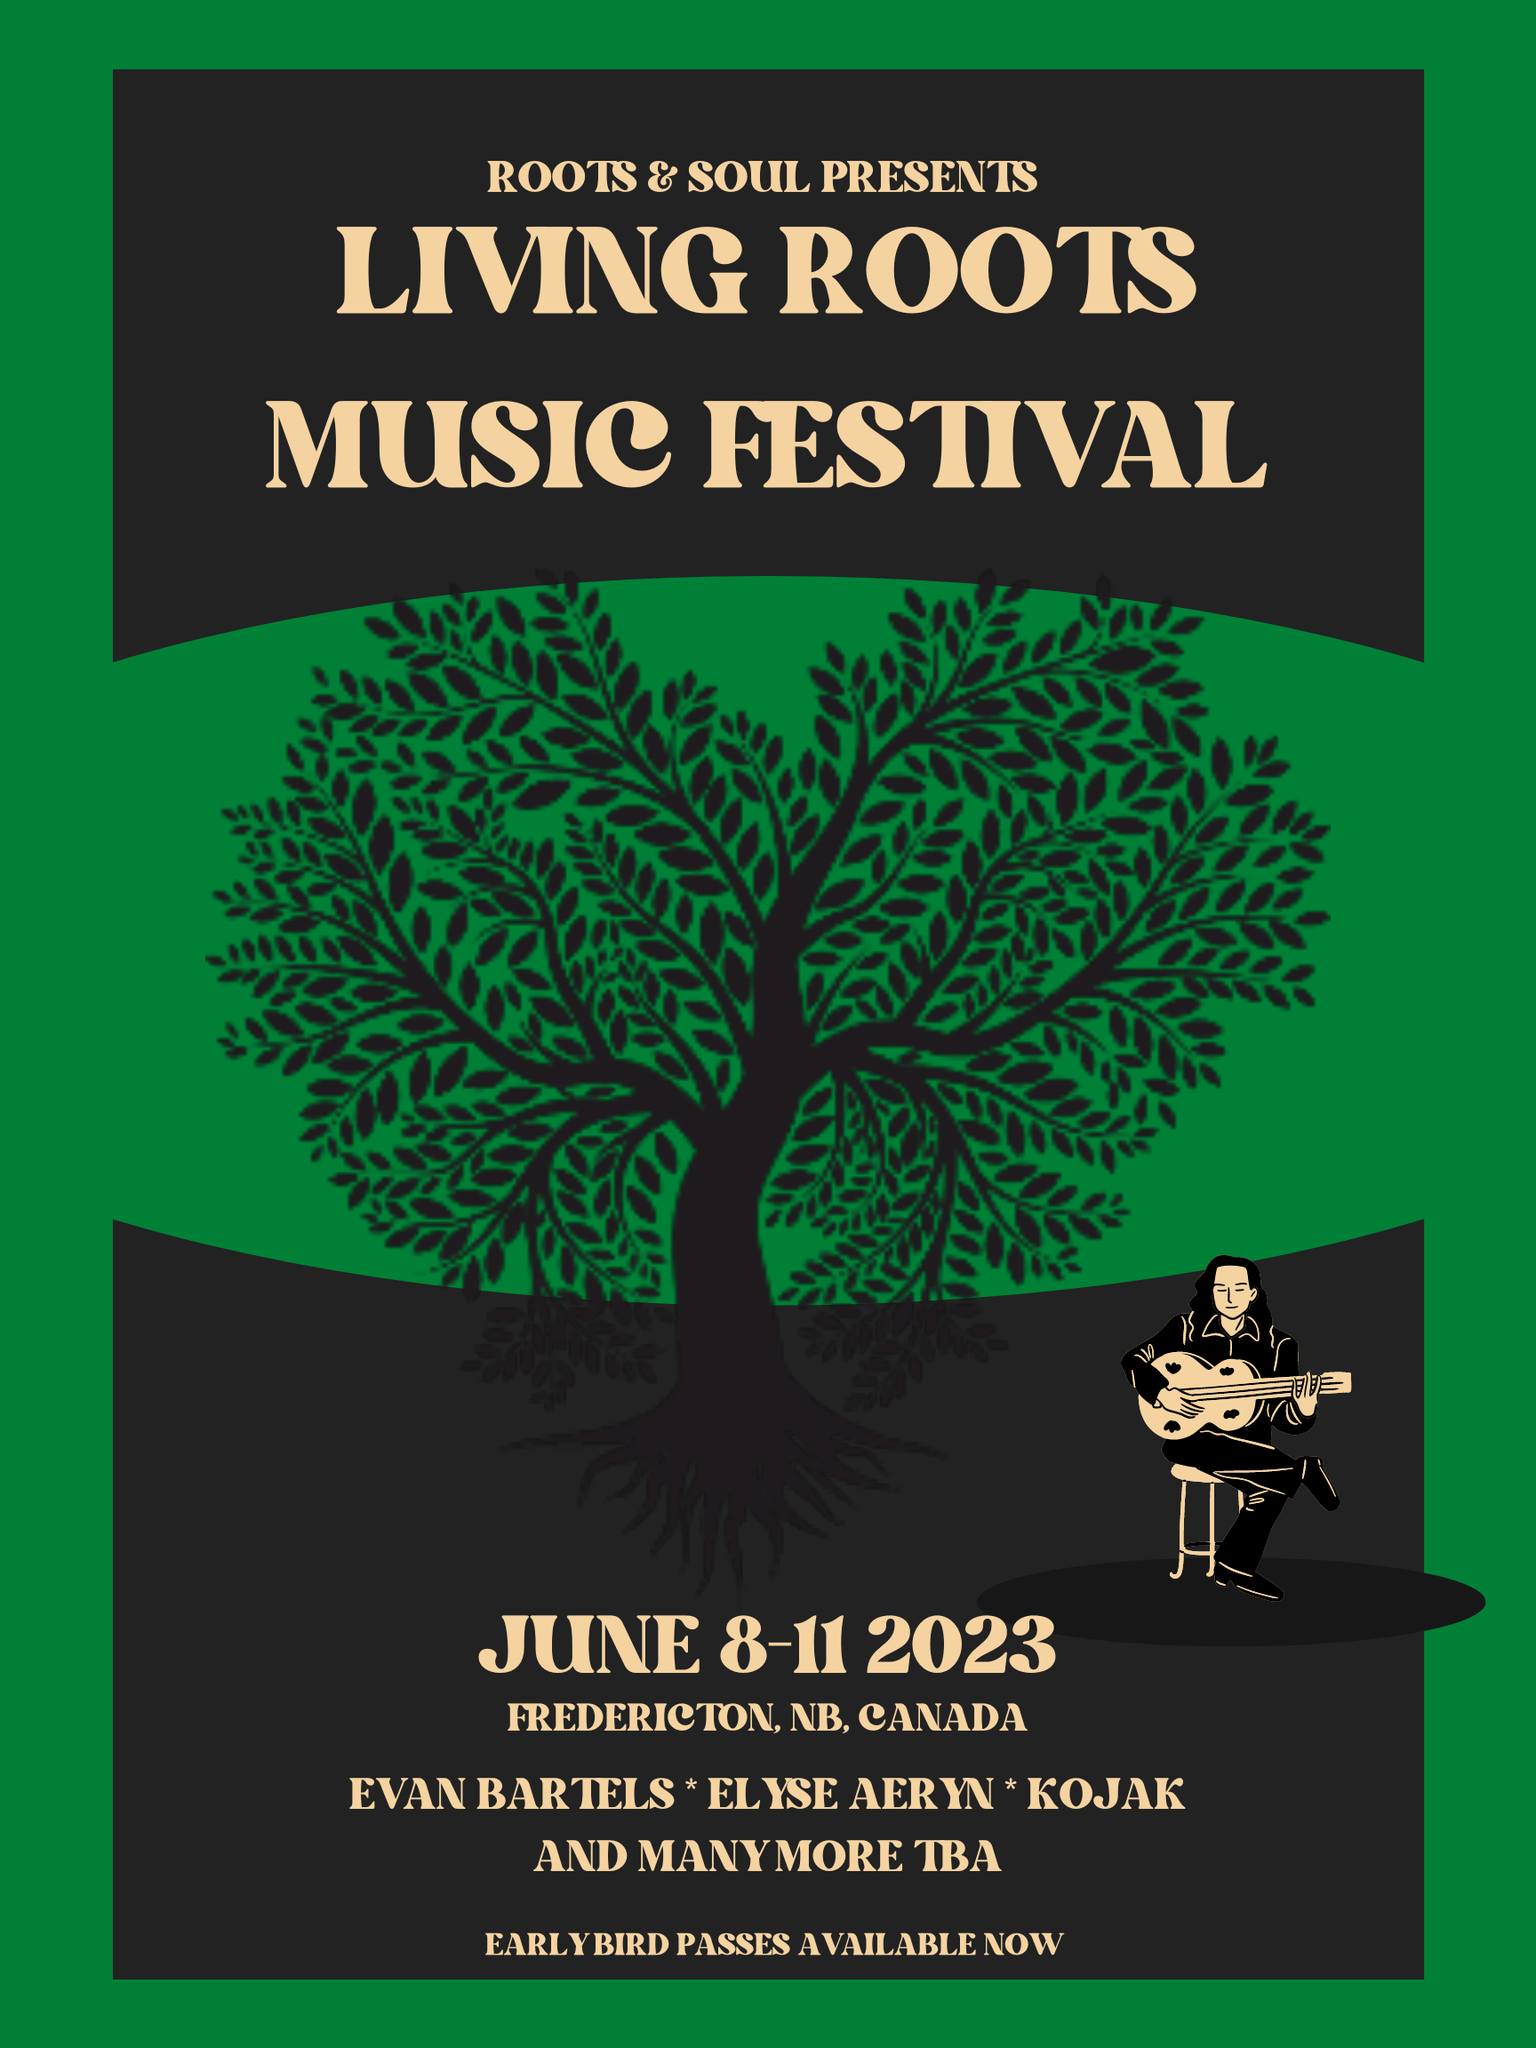 Roots and Soul presents Living Roots Music Festival. June 8-11, 2023, Fredericton NB, Canada. Evan Bartels, Elyse Aeryn, Kojak, and many more. Early bird passes available now.